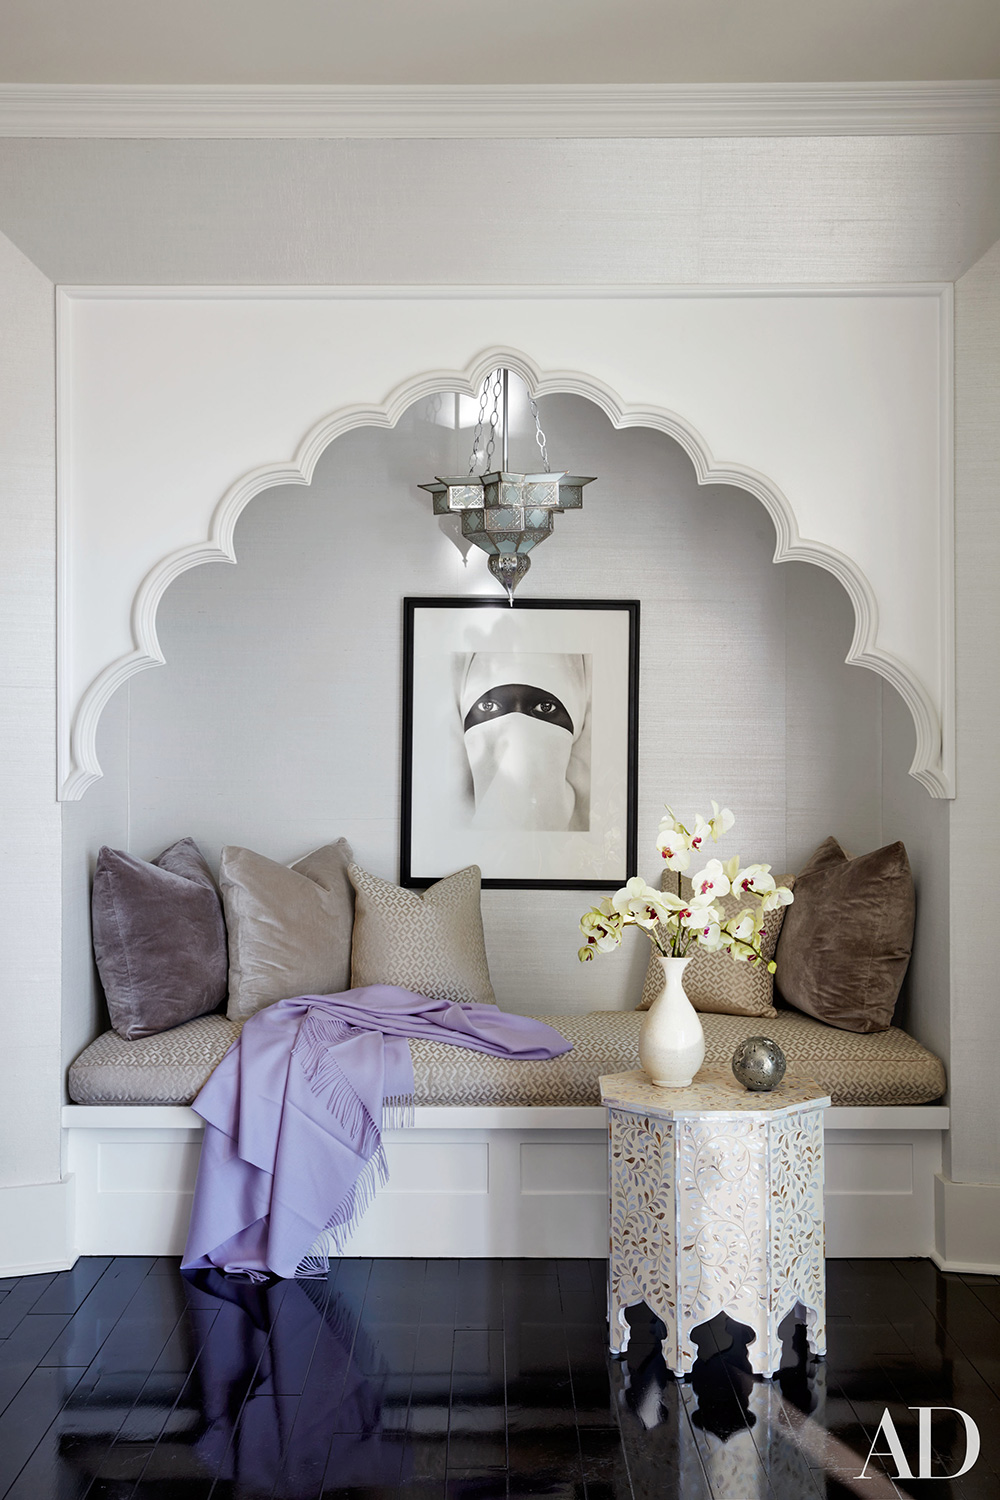 A reading nook in Khloe's bedroom.